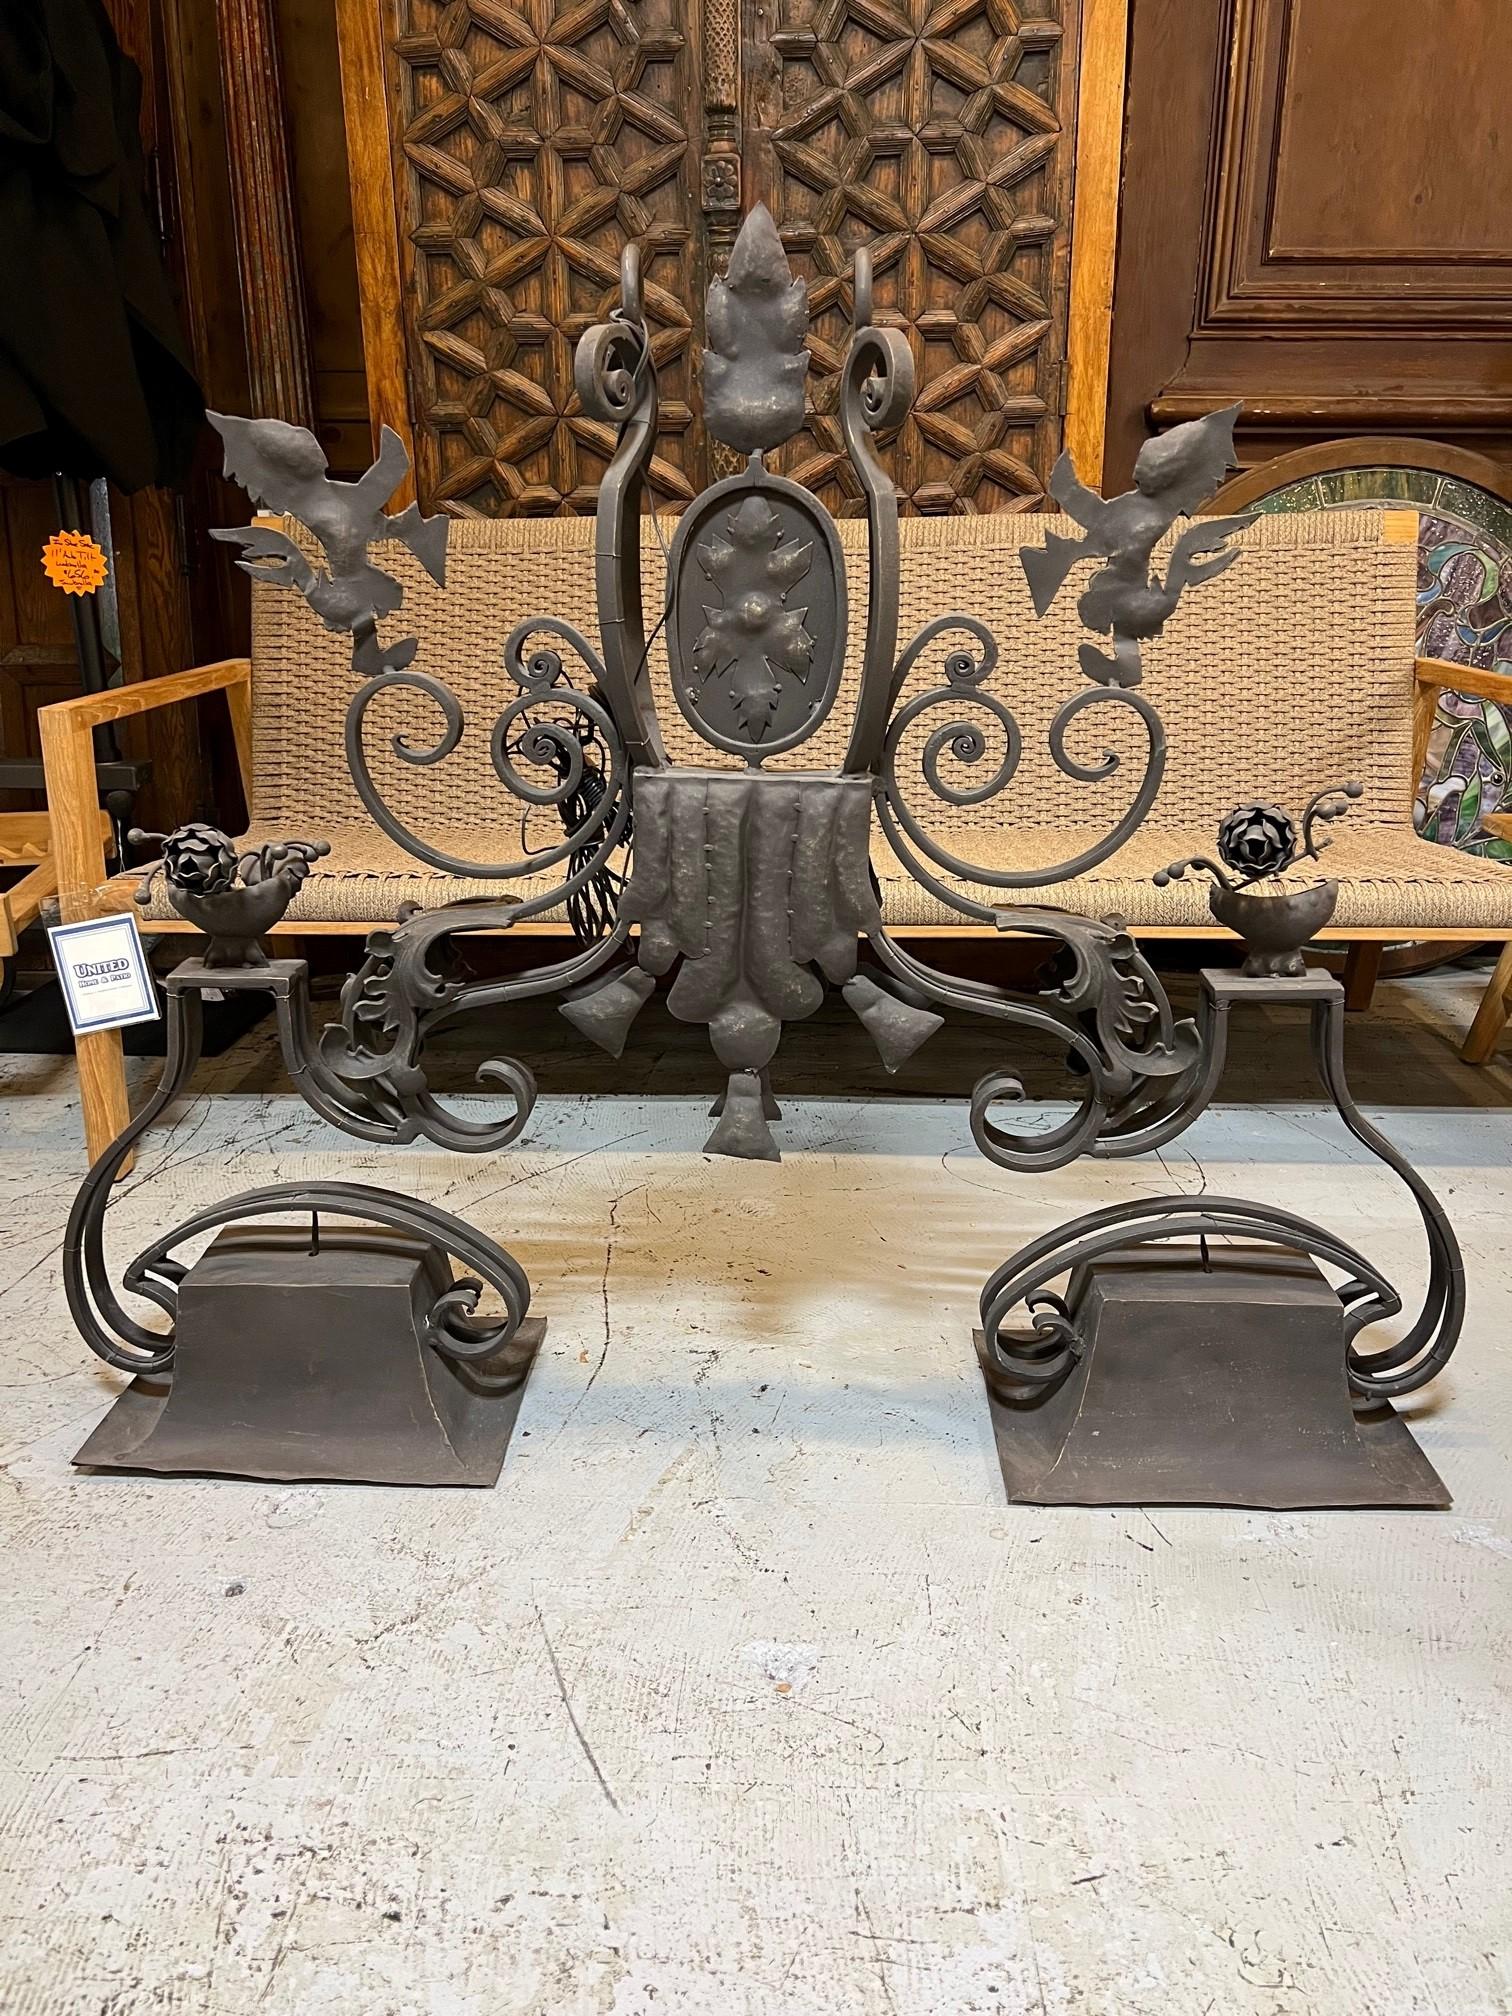 Hand forged Wrought iron Island or pool table chandelier made in the USA. This is a great chandelier that would look amazing over a kitchen Island, it has a good heavy iron look but is also very decorative. It has never been installed and all of the